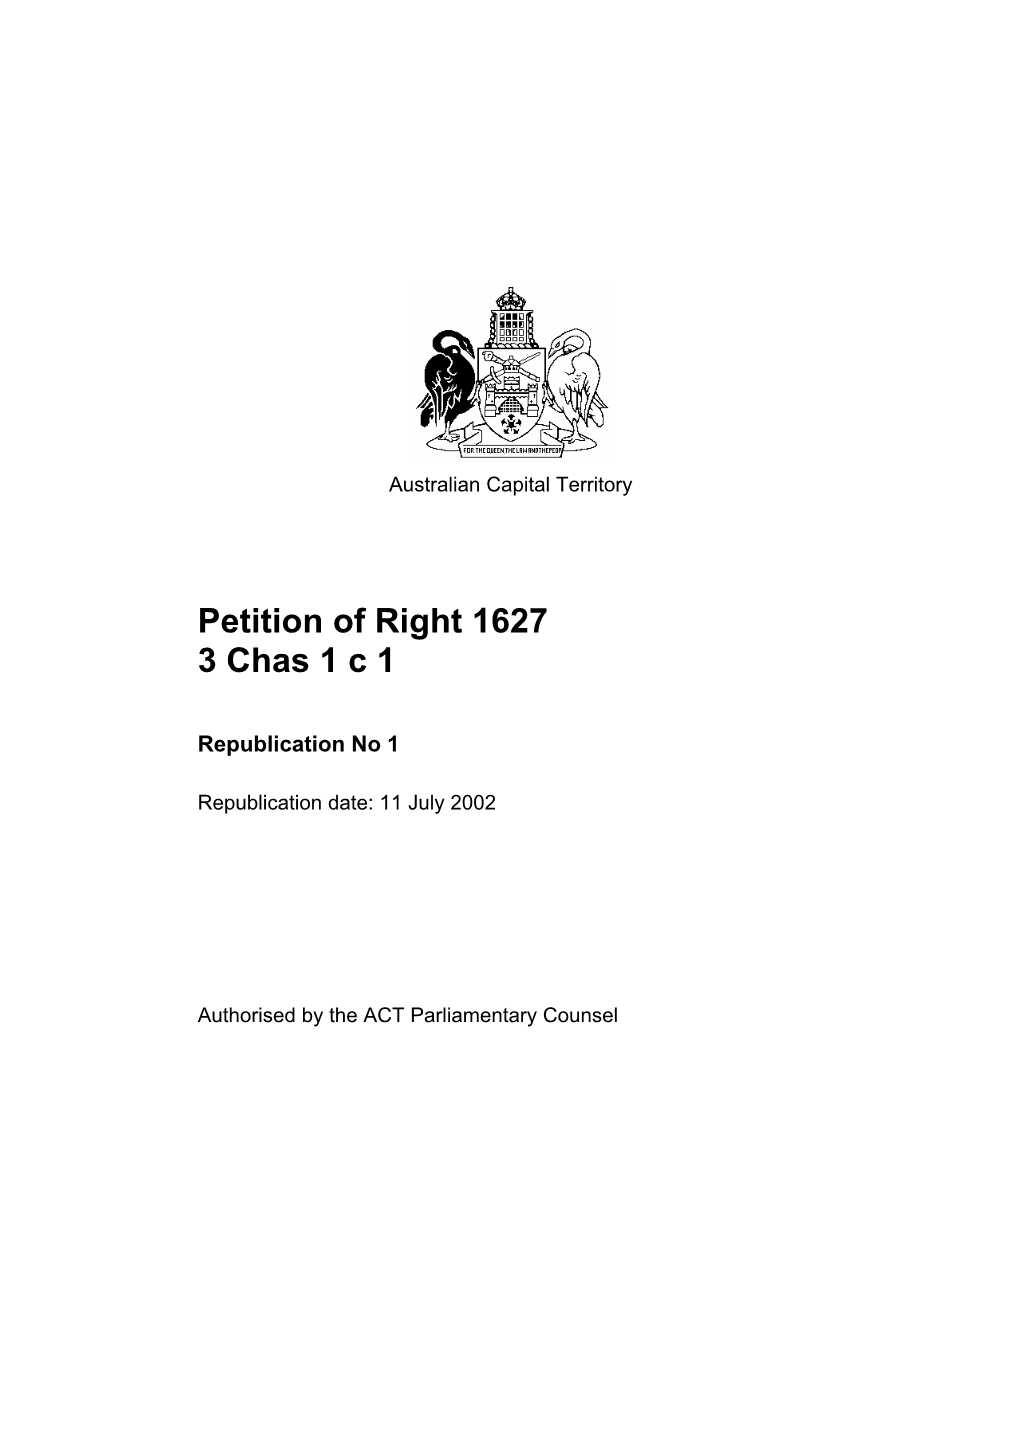 Petition of Right 1627 3 Chas 1 C 1